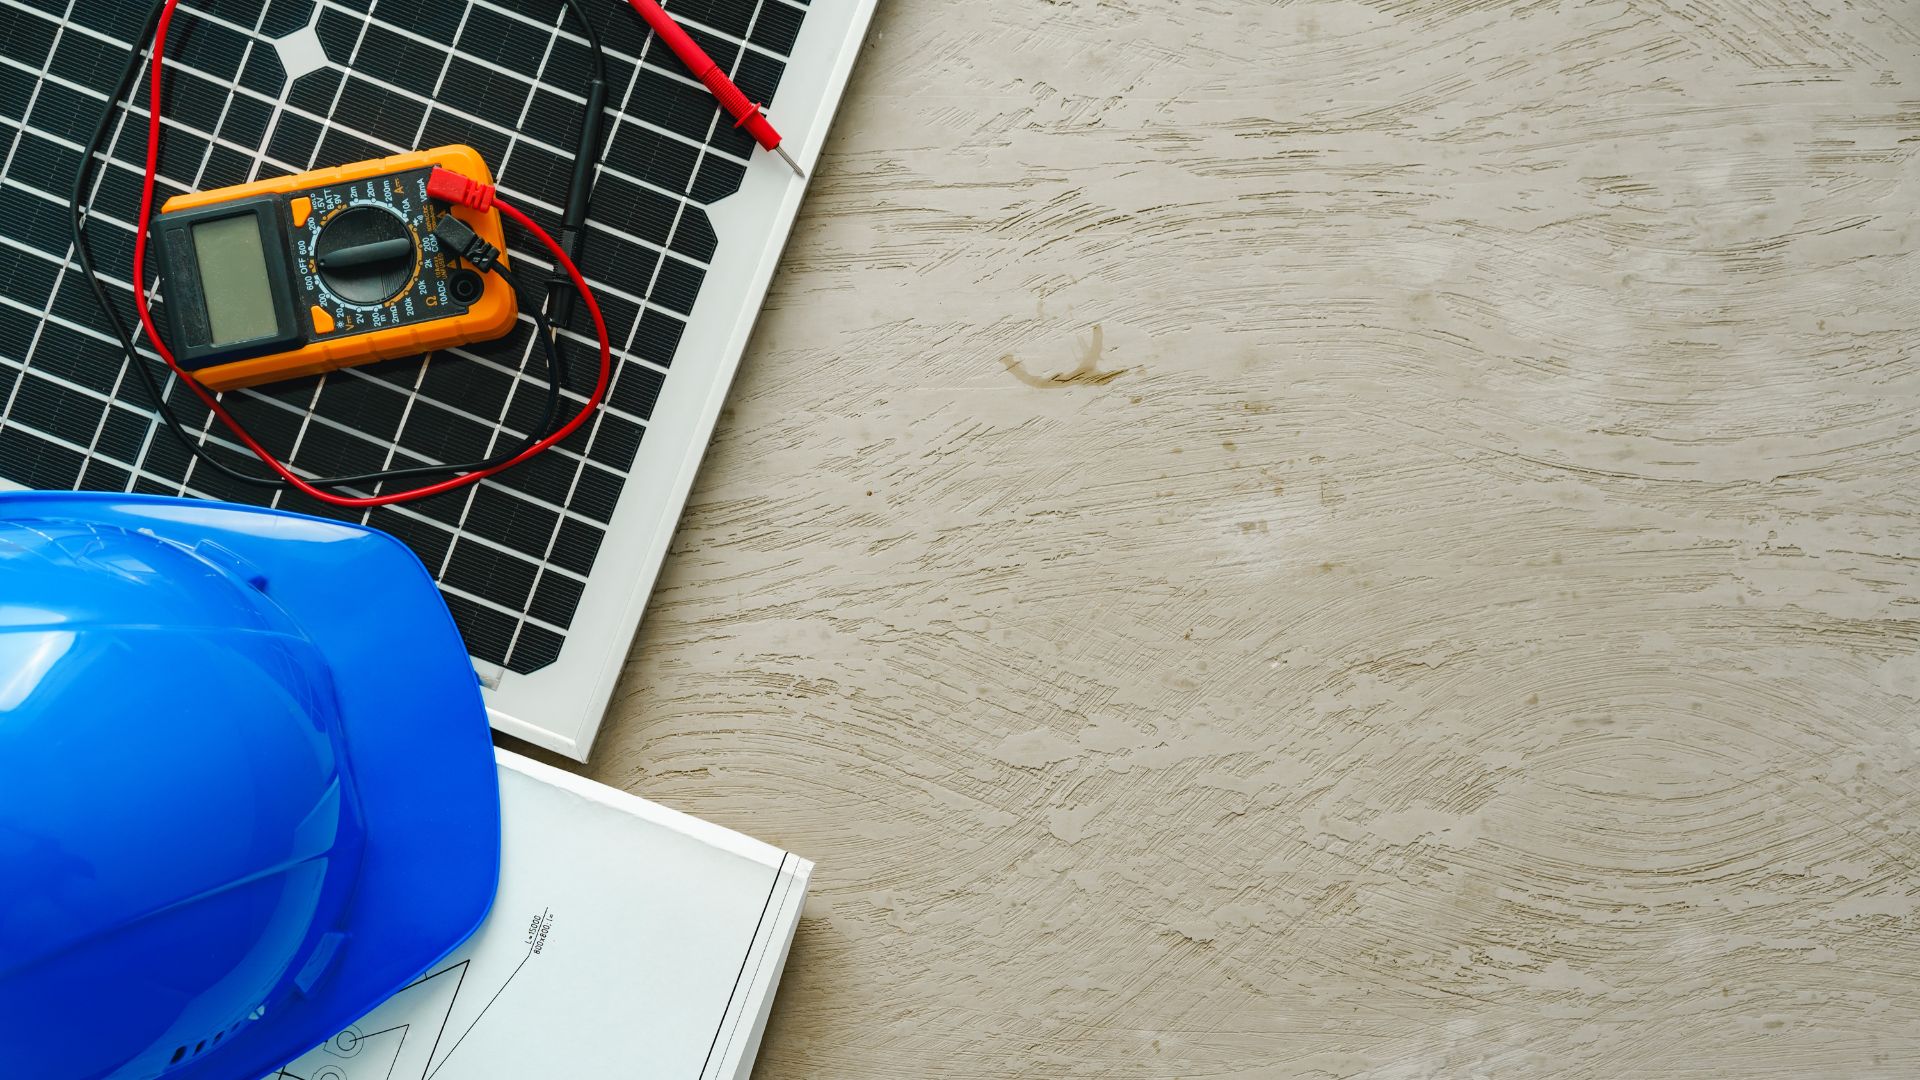 What Are the Key Steps for a Seamless Solar Installation?